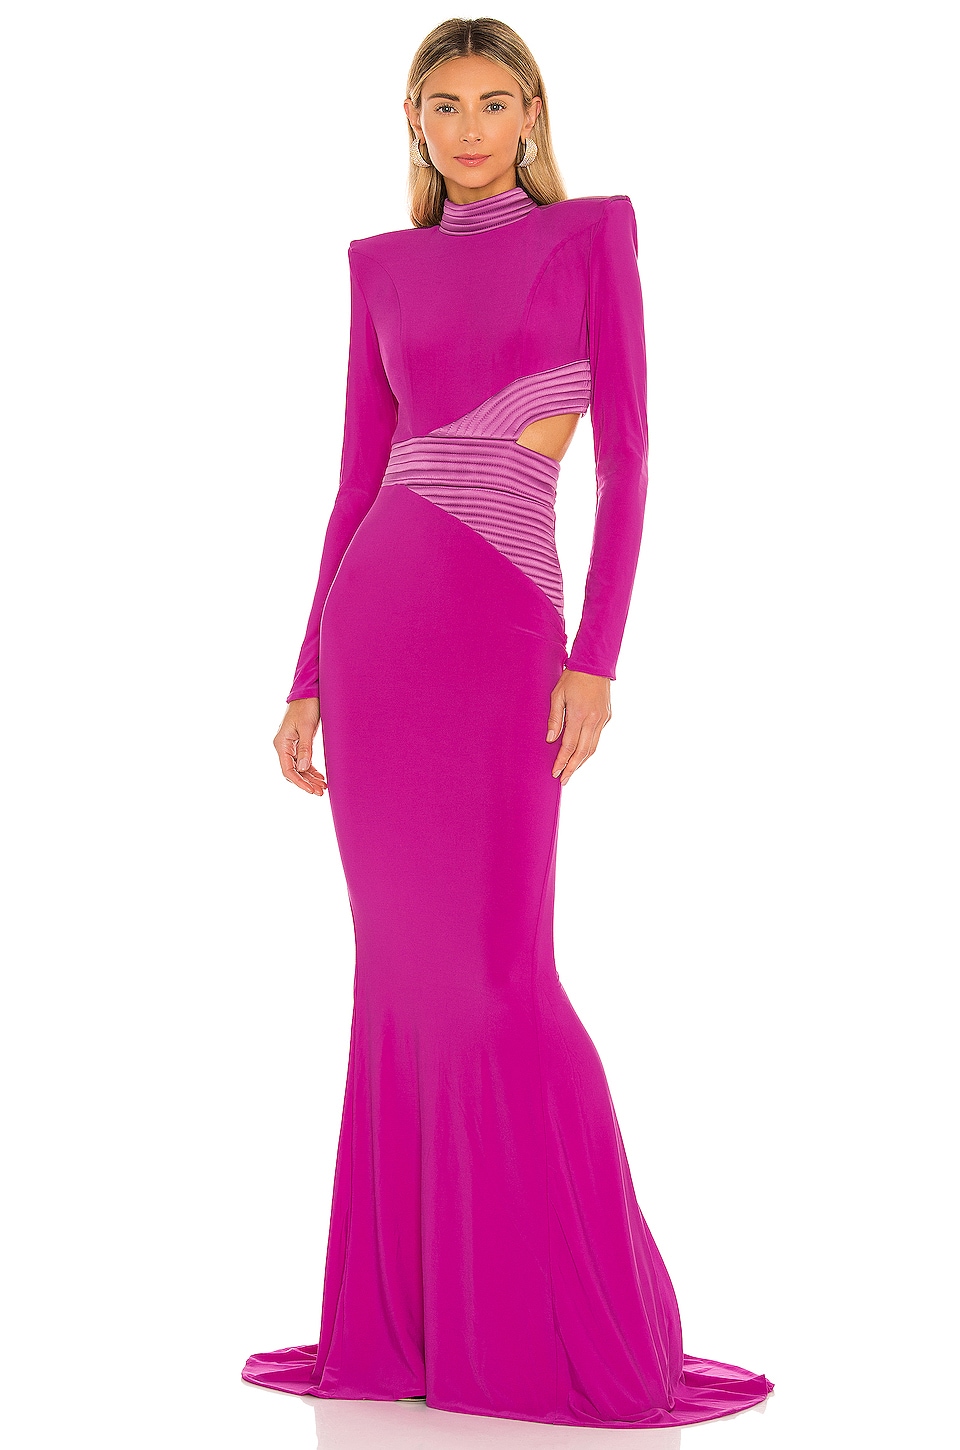 Zhivago Message To Love Gown in Berry | REVOLVE